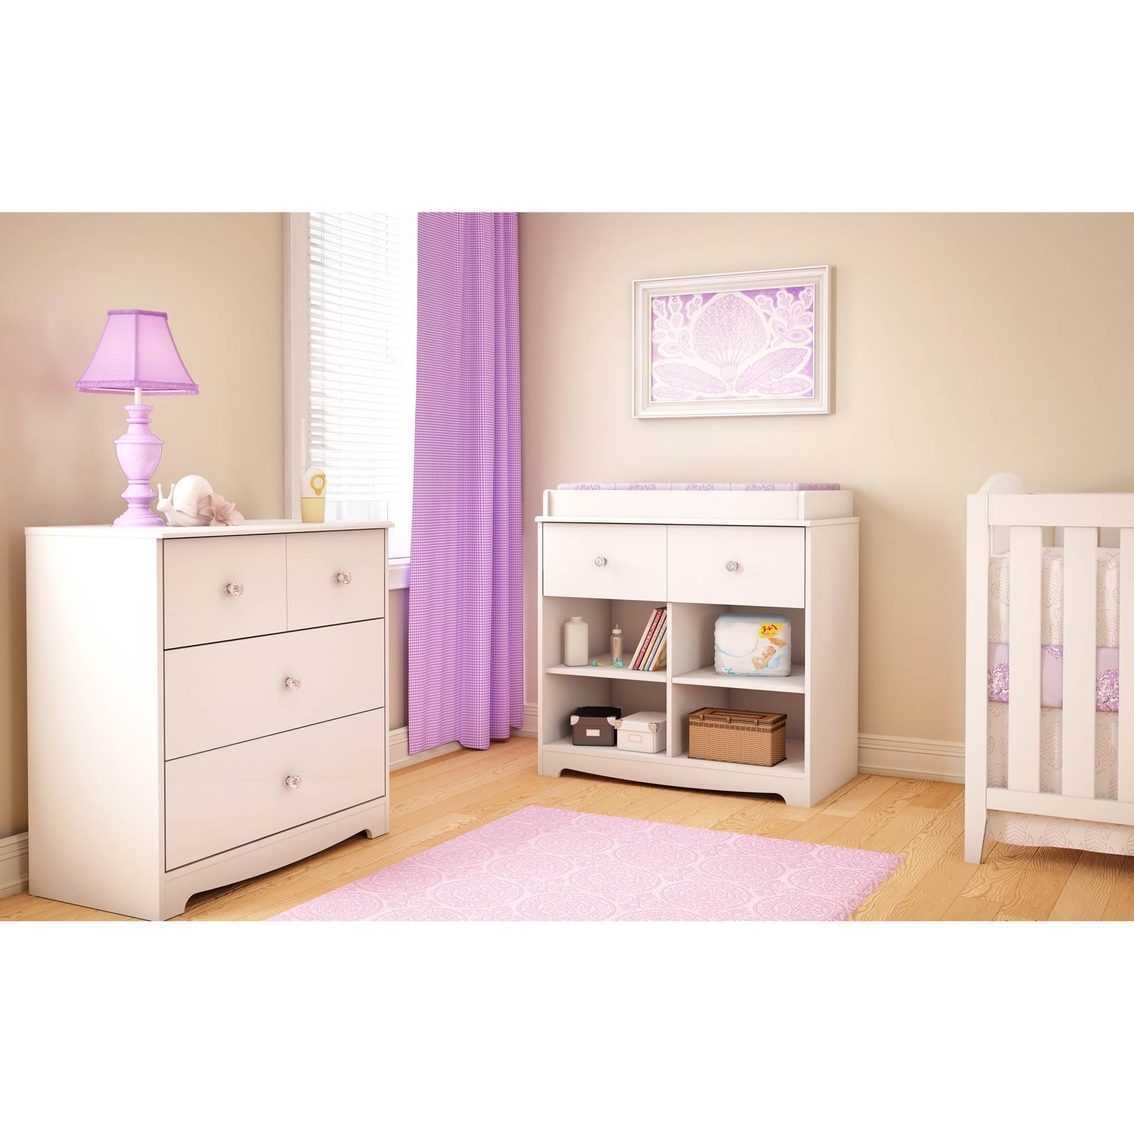 South Shore Little Jewel Collection Changing Table - Image 2 of 2